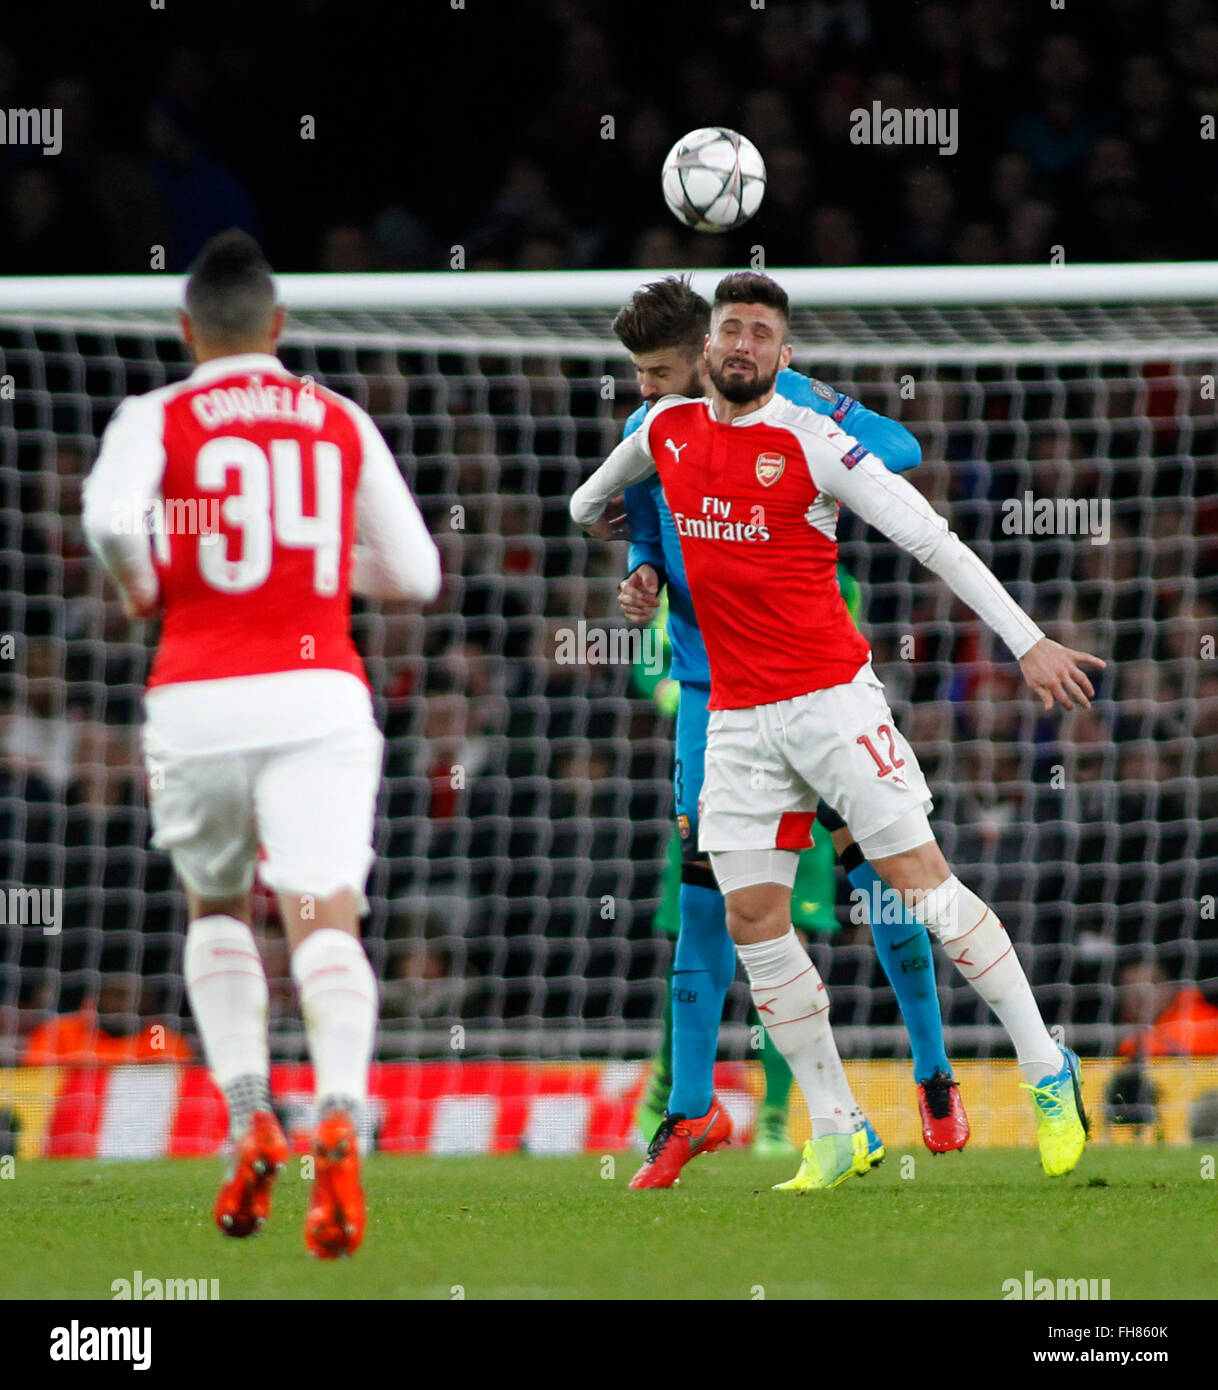 London, UK. 23rd Feb, 2016. Gerard Pique of Barcelona and Olivier Giroud of Arsenal compete for the ball during the Champions League match between Arsenal and Barcelona at The Emirates Stadium on February 23, 2016 in London, United Kingdom. Credit:  Mitchell Gunn/ESPA/Alamy Live News Stock Photo